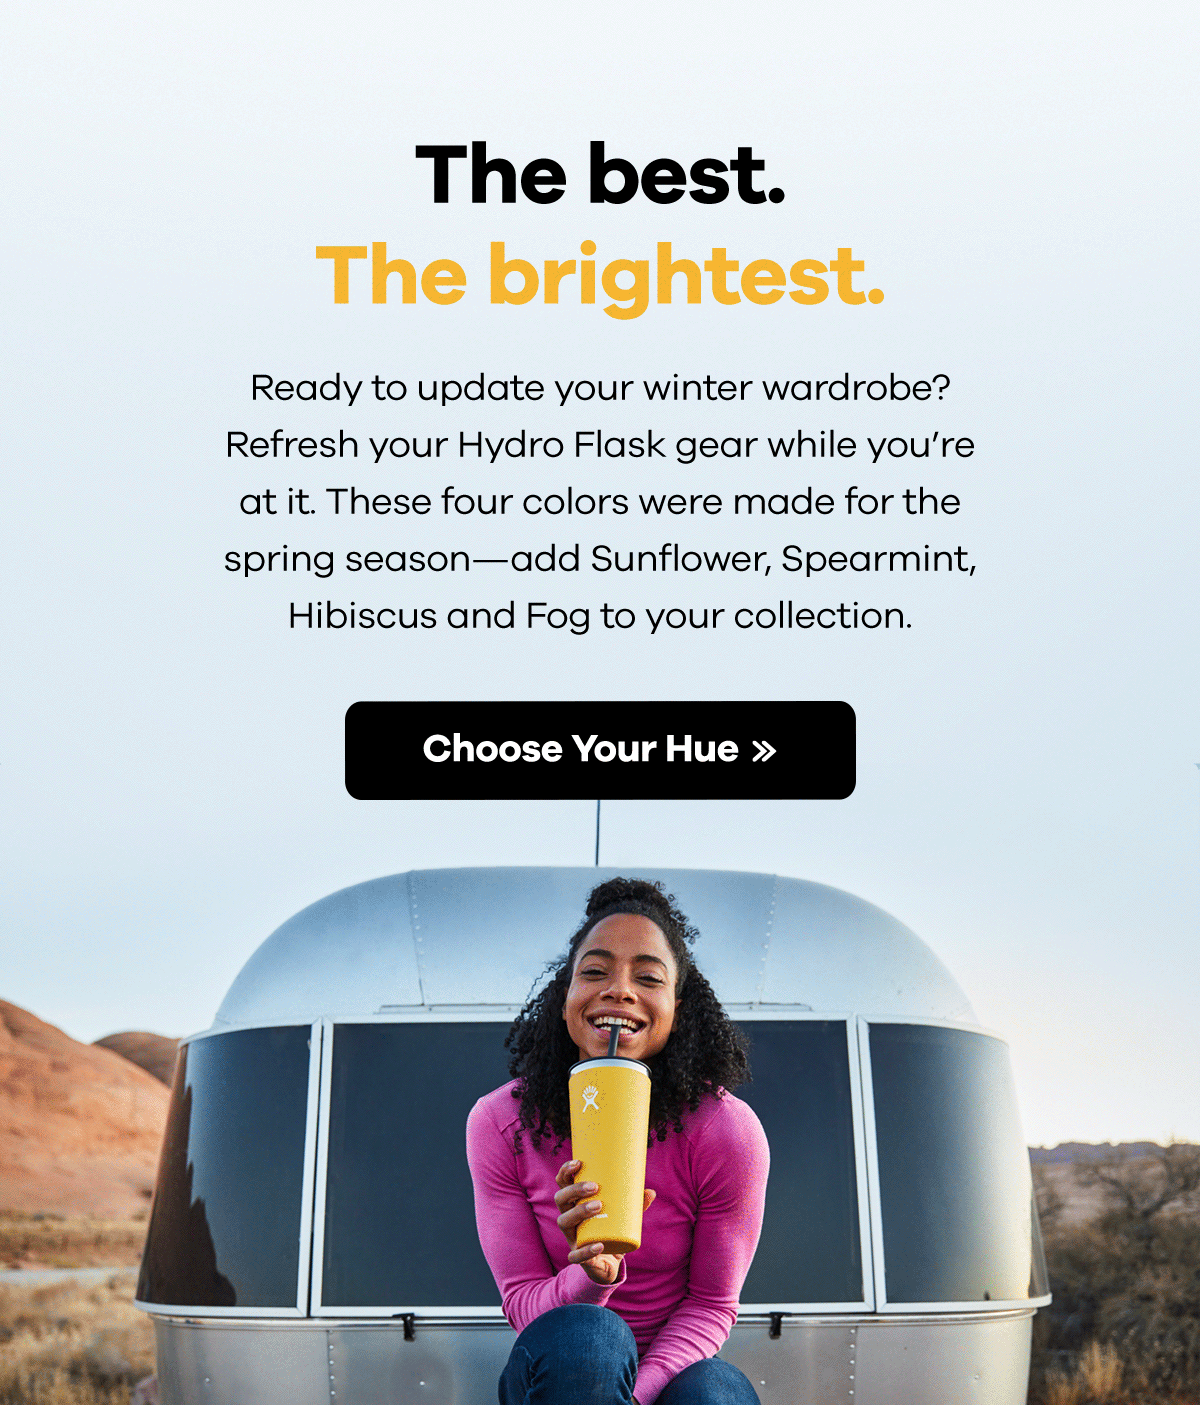 The best. The brightest. Ready to update your winter wardrobe? Refresh your Hydro Flask gear while you''re at it. These four colors were made for the spring season-add Sunflower, Spearmint, Hibiscus and Fog to your collection. | Choose Your Hue >>